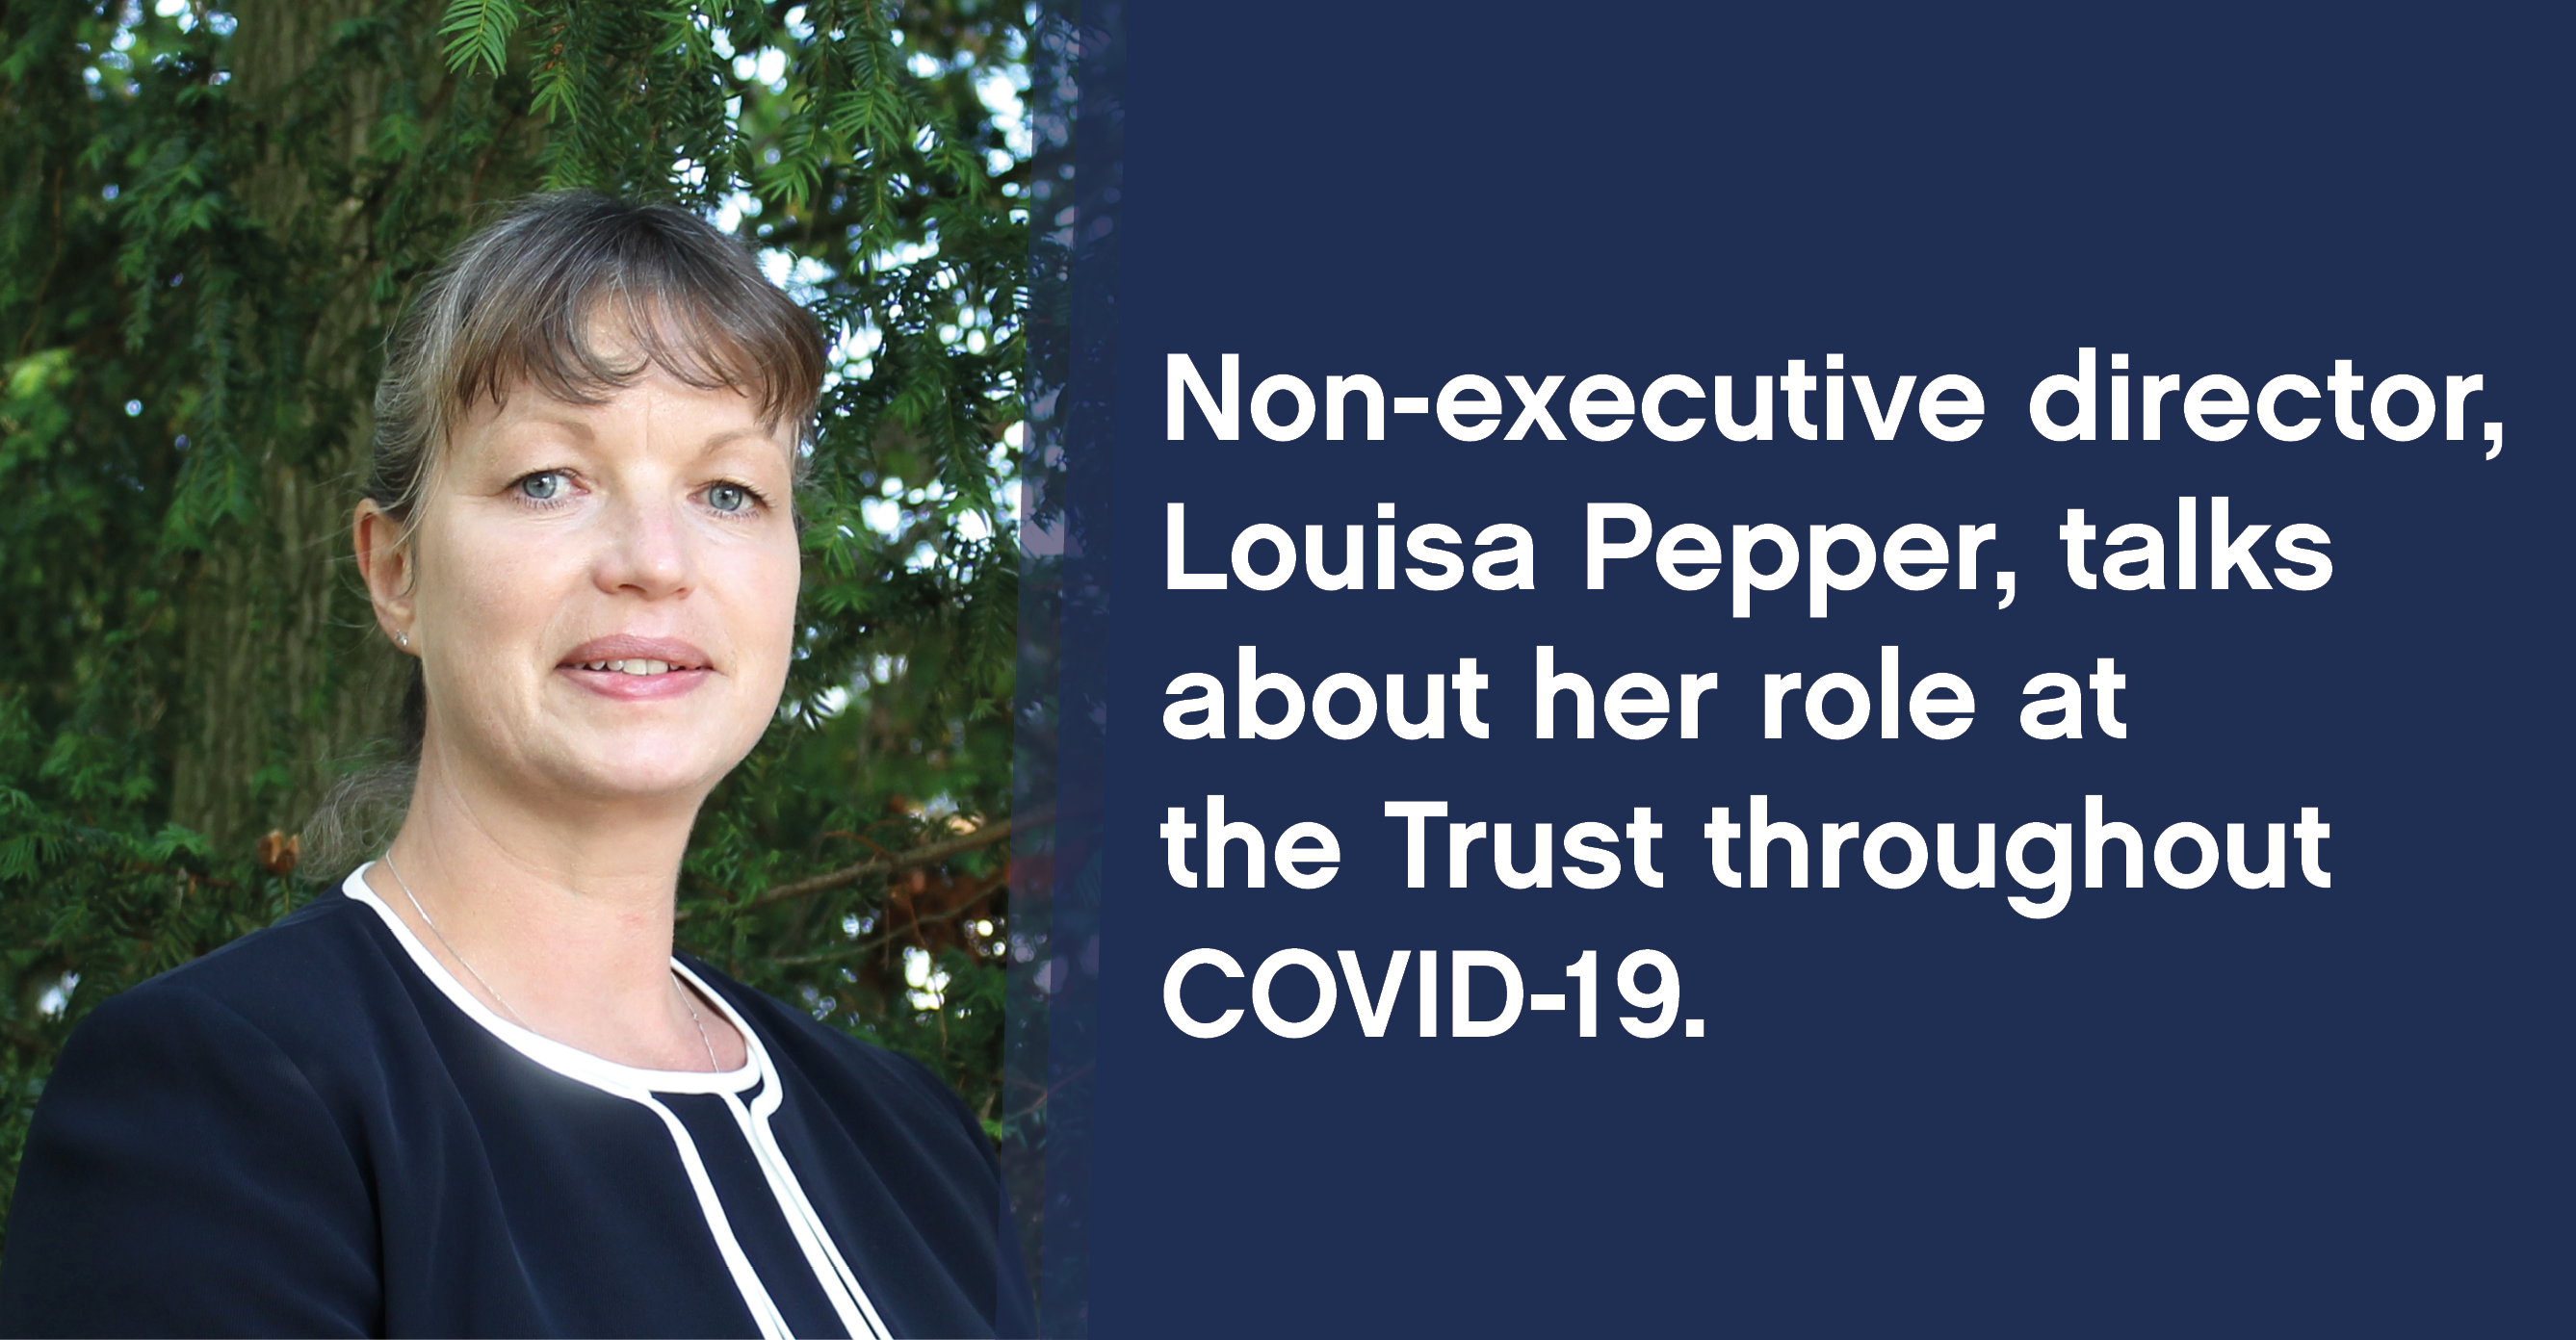 Louisa Pepper, non-executive director at the West Suffolk NHS Foundation Trust.